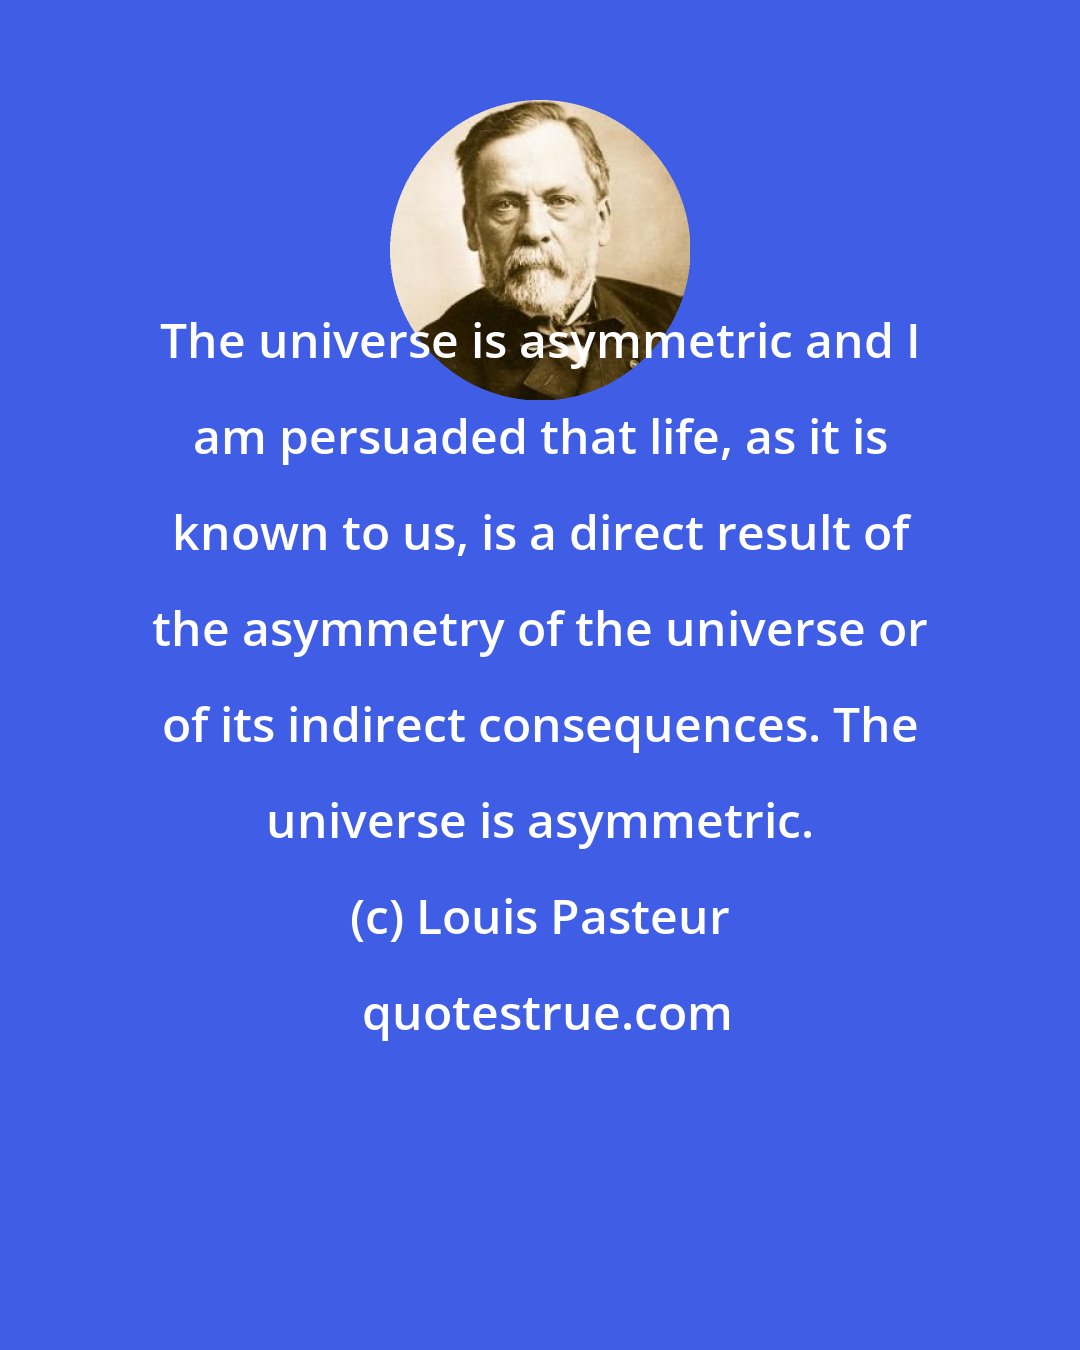 Louis Pasteur: The universe is asymmetric and I am persuaded that life, as it is known to us, is a direct result of the asymmetry of the universe or of its indirect consequences. The universe is asymmetric.